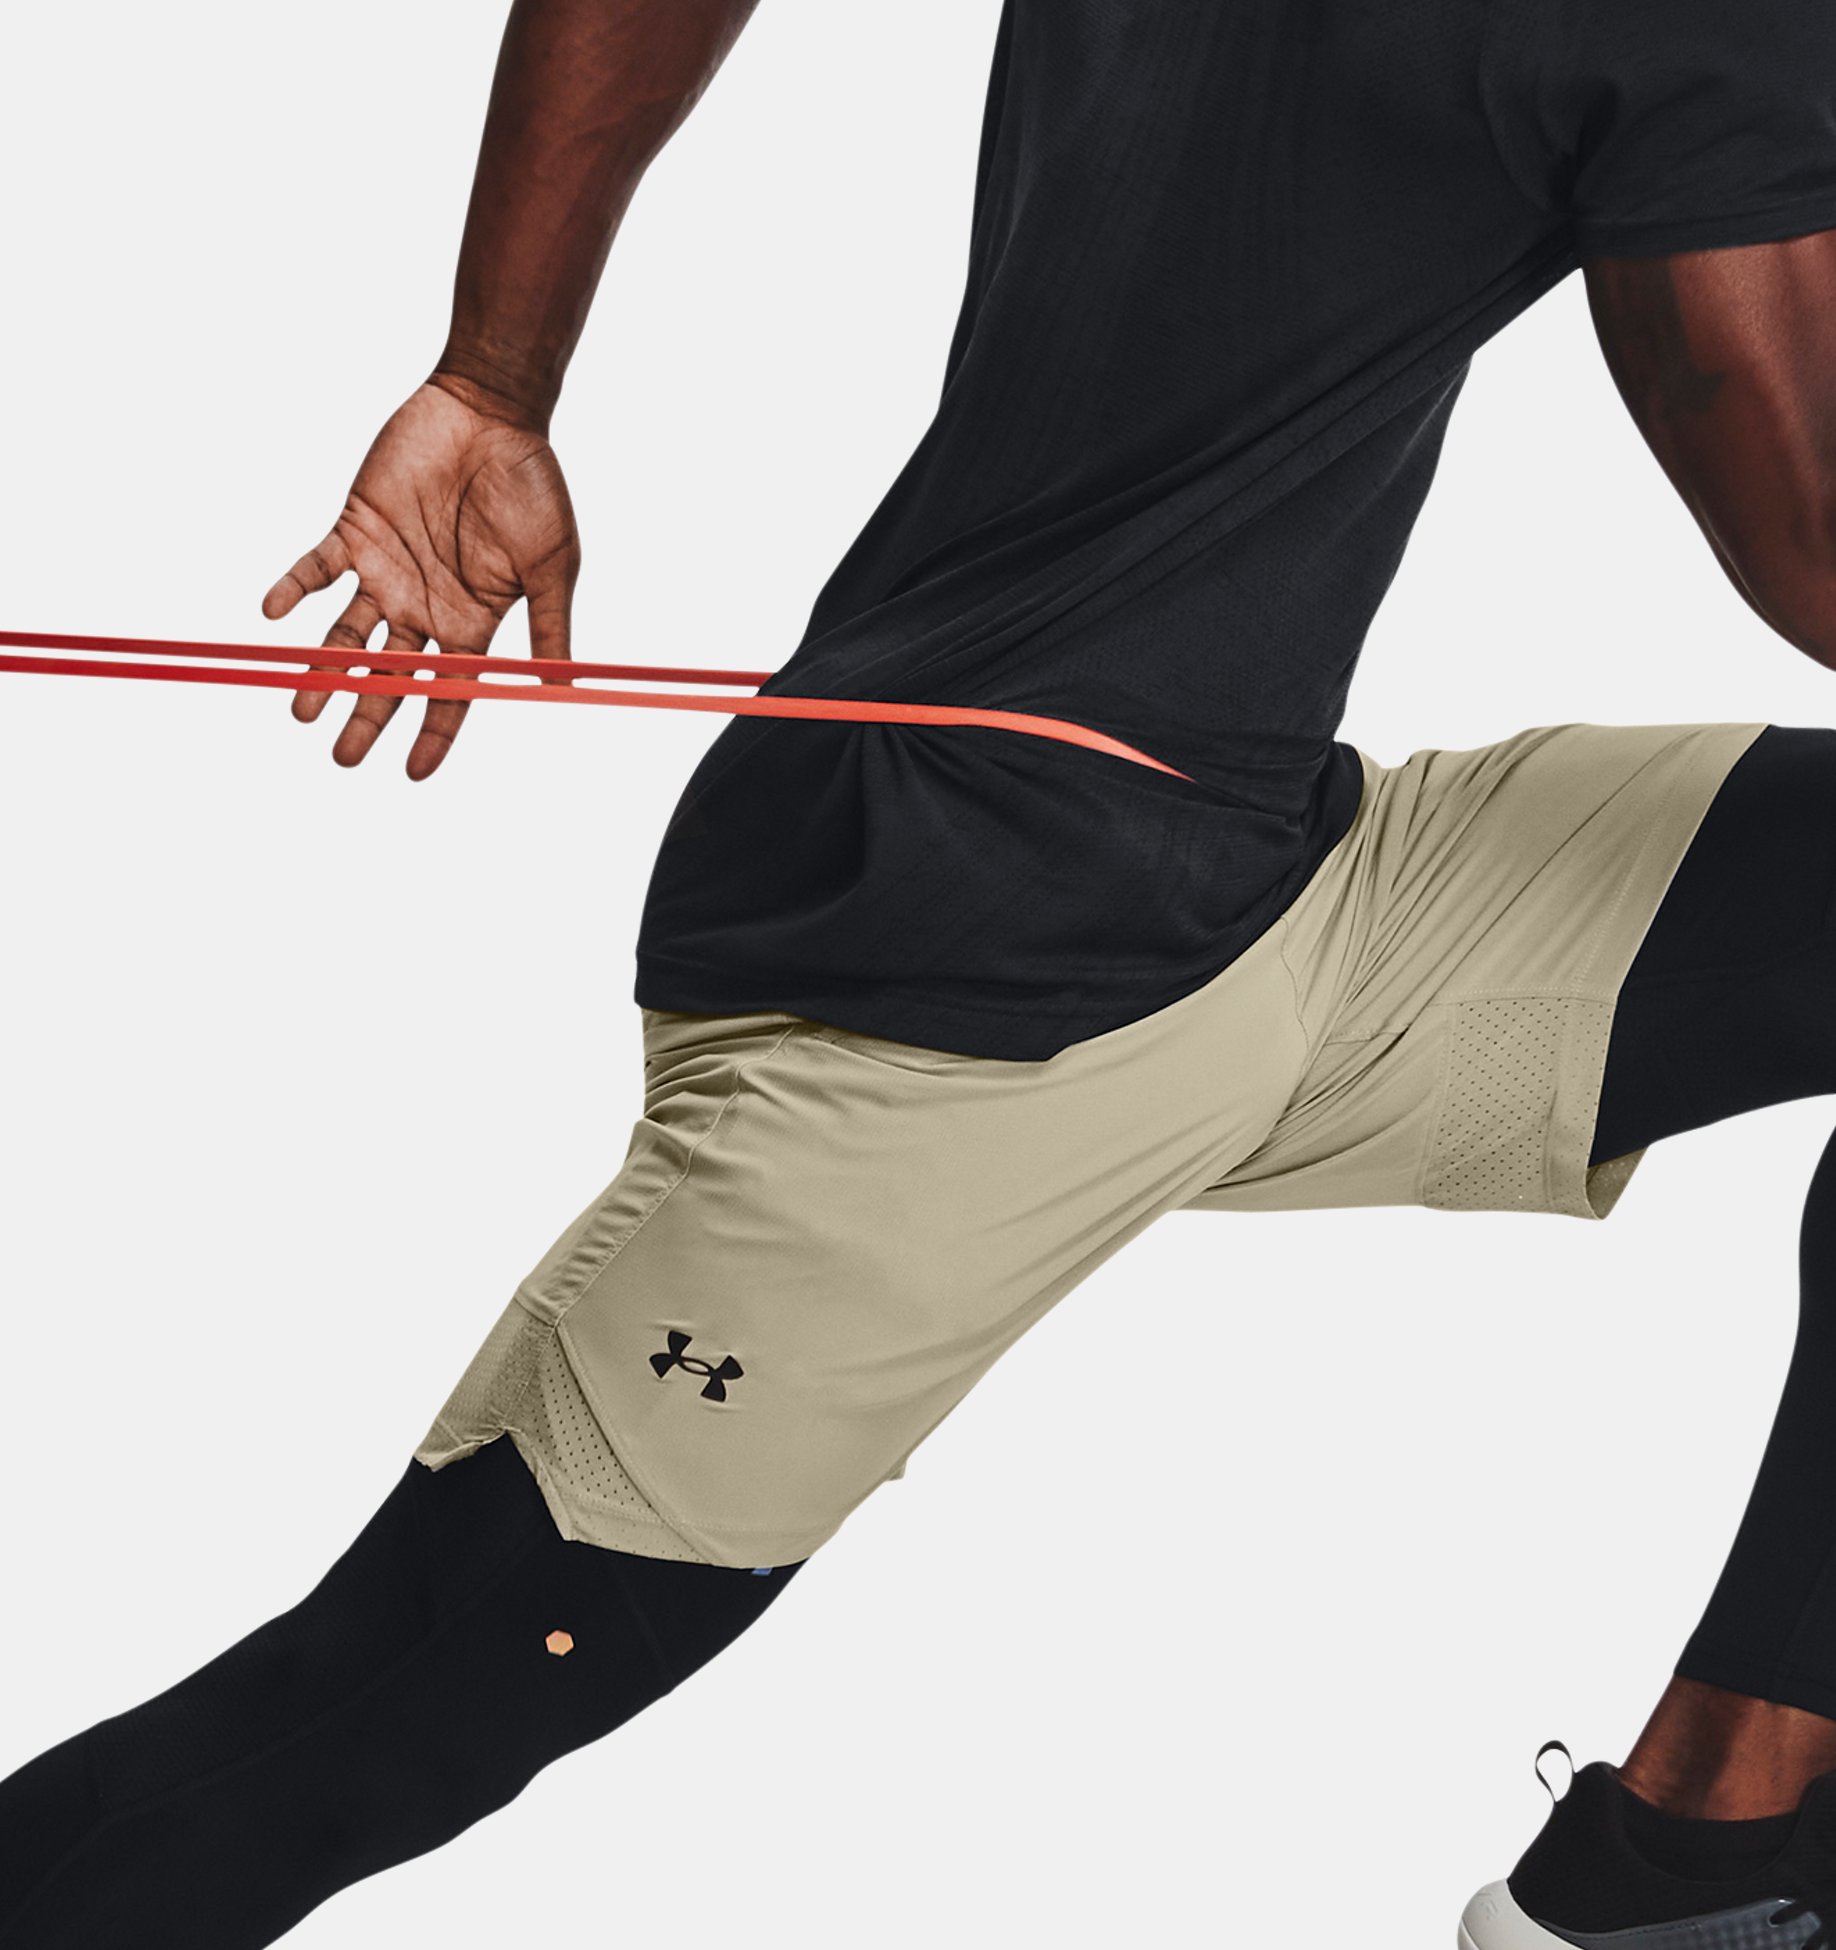 Men's Leggings & Tights - Running, Gym & More - Under Armour NZ